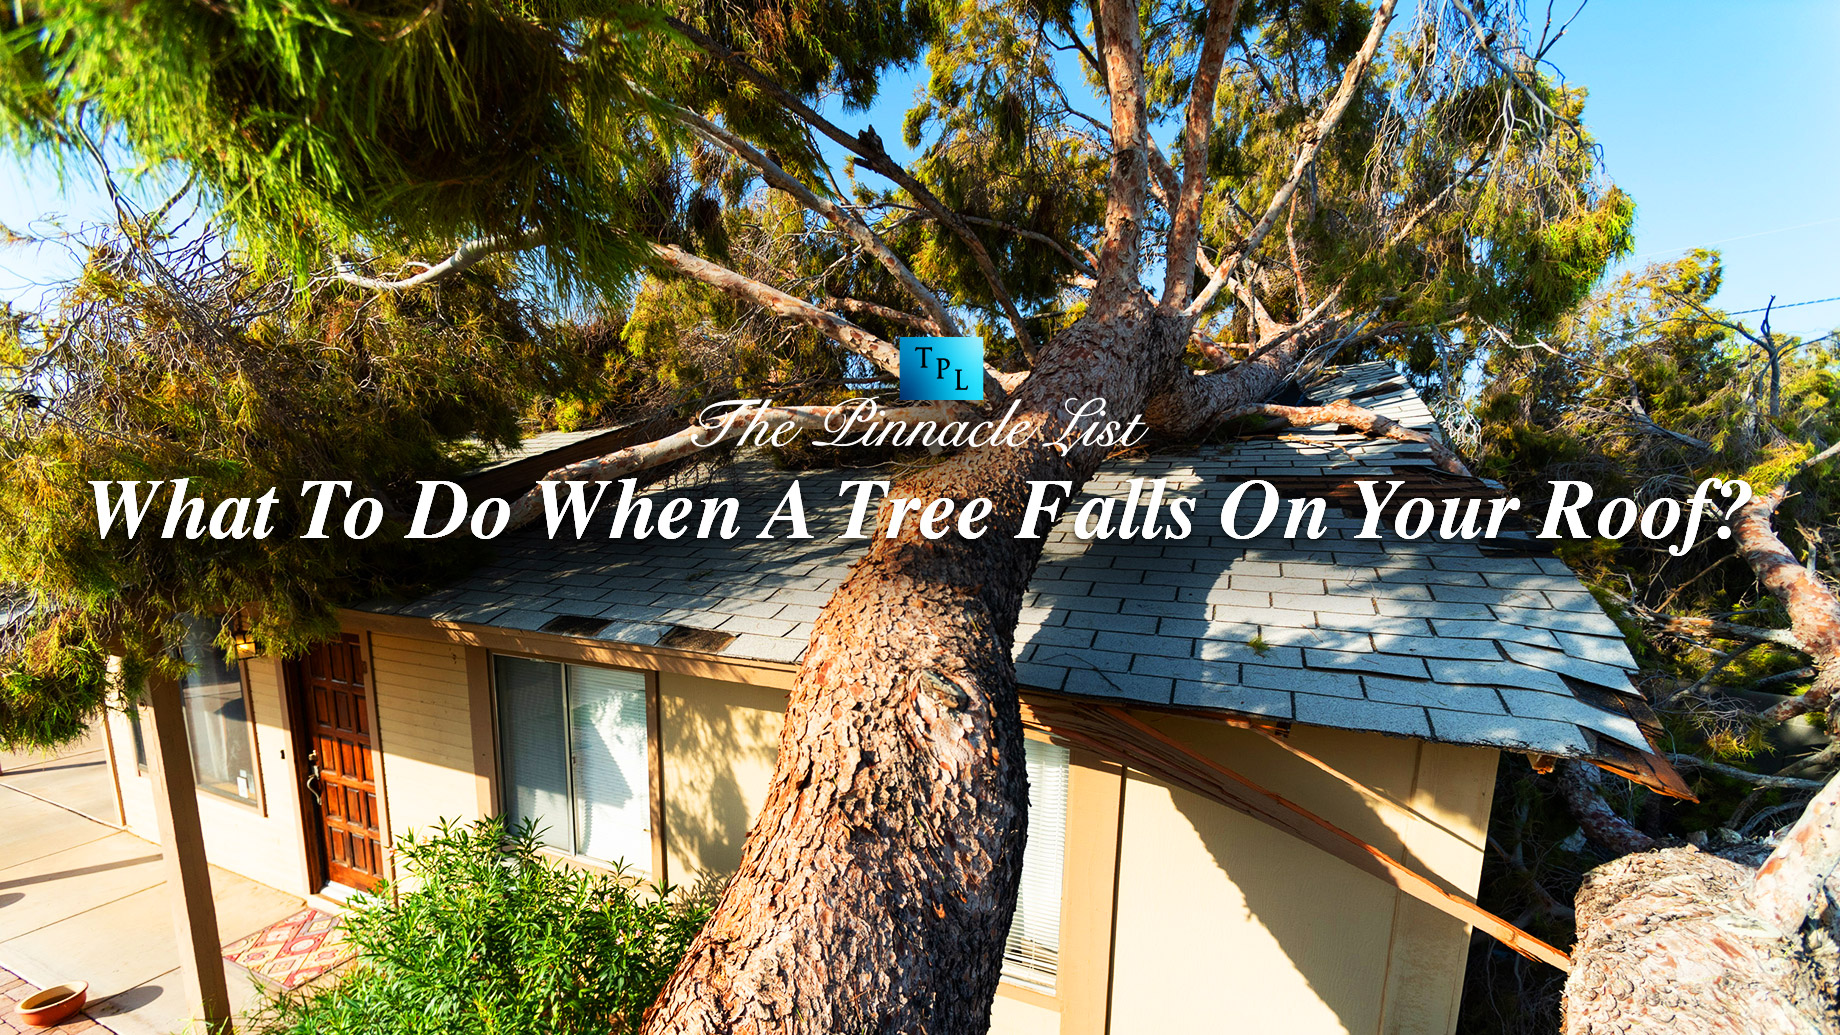 What To Do When A Tree Falls On Your Roof?